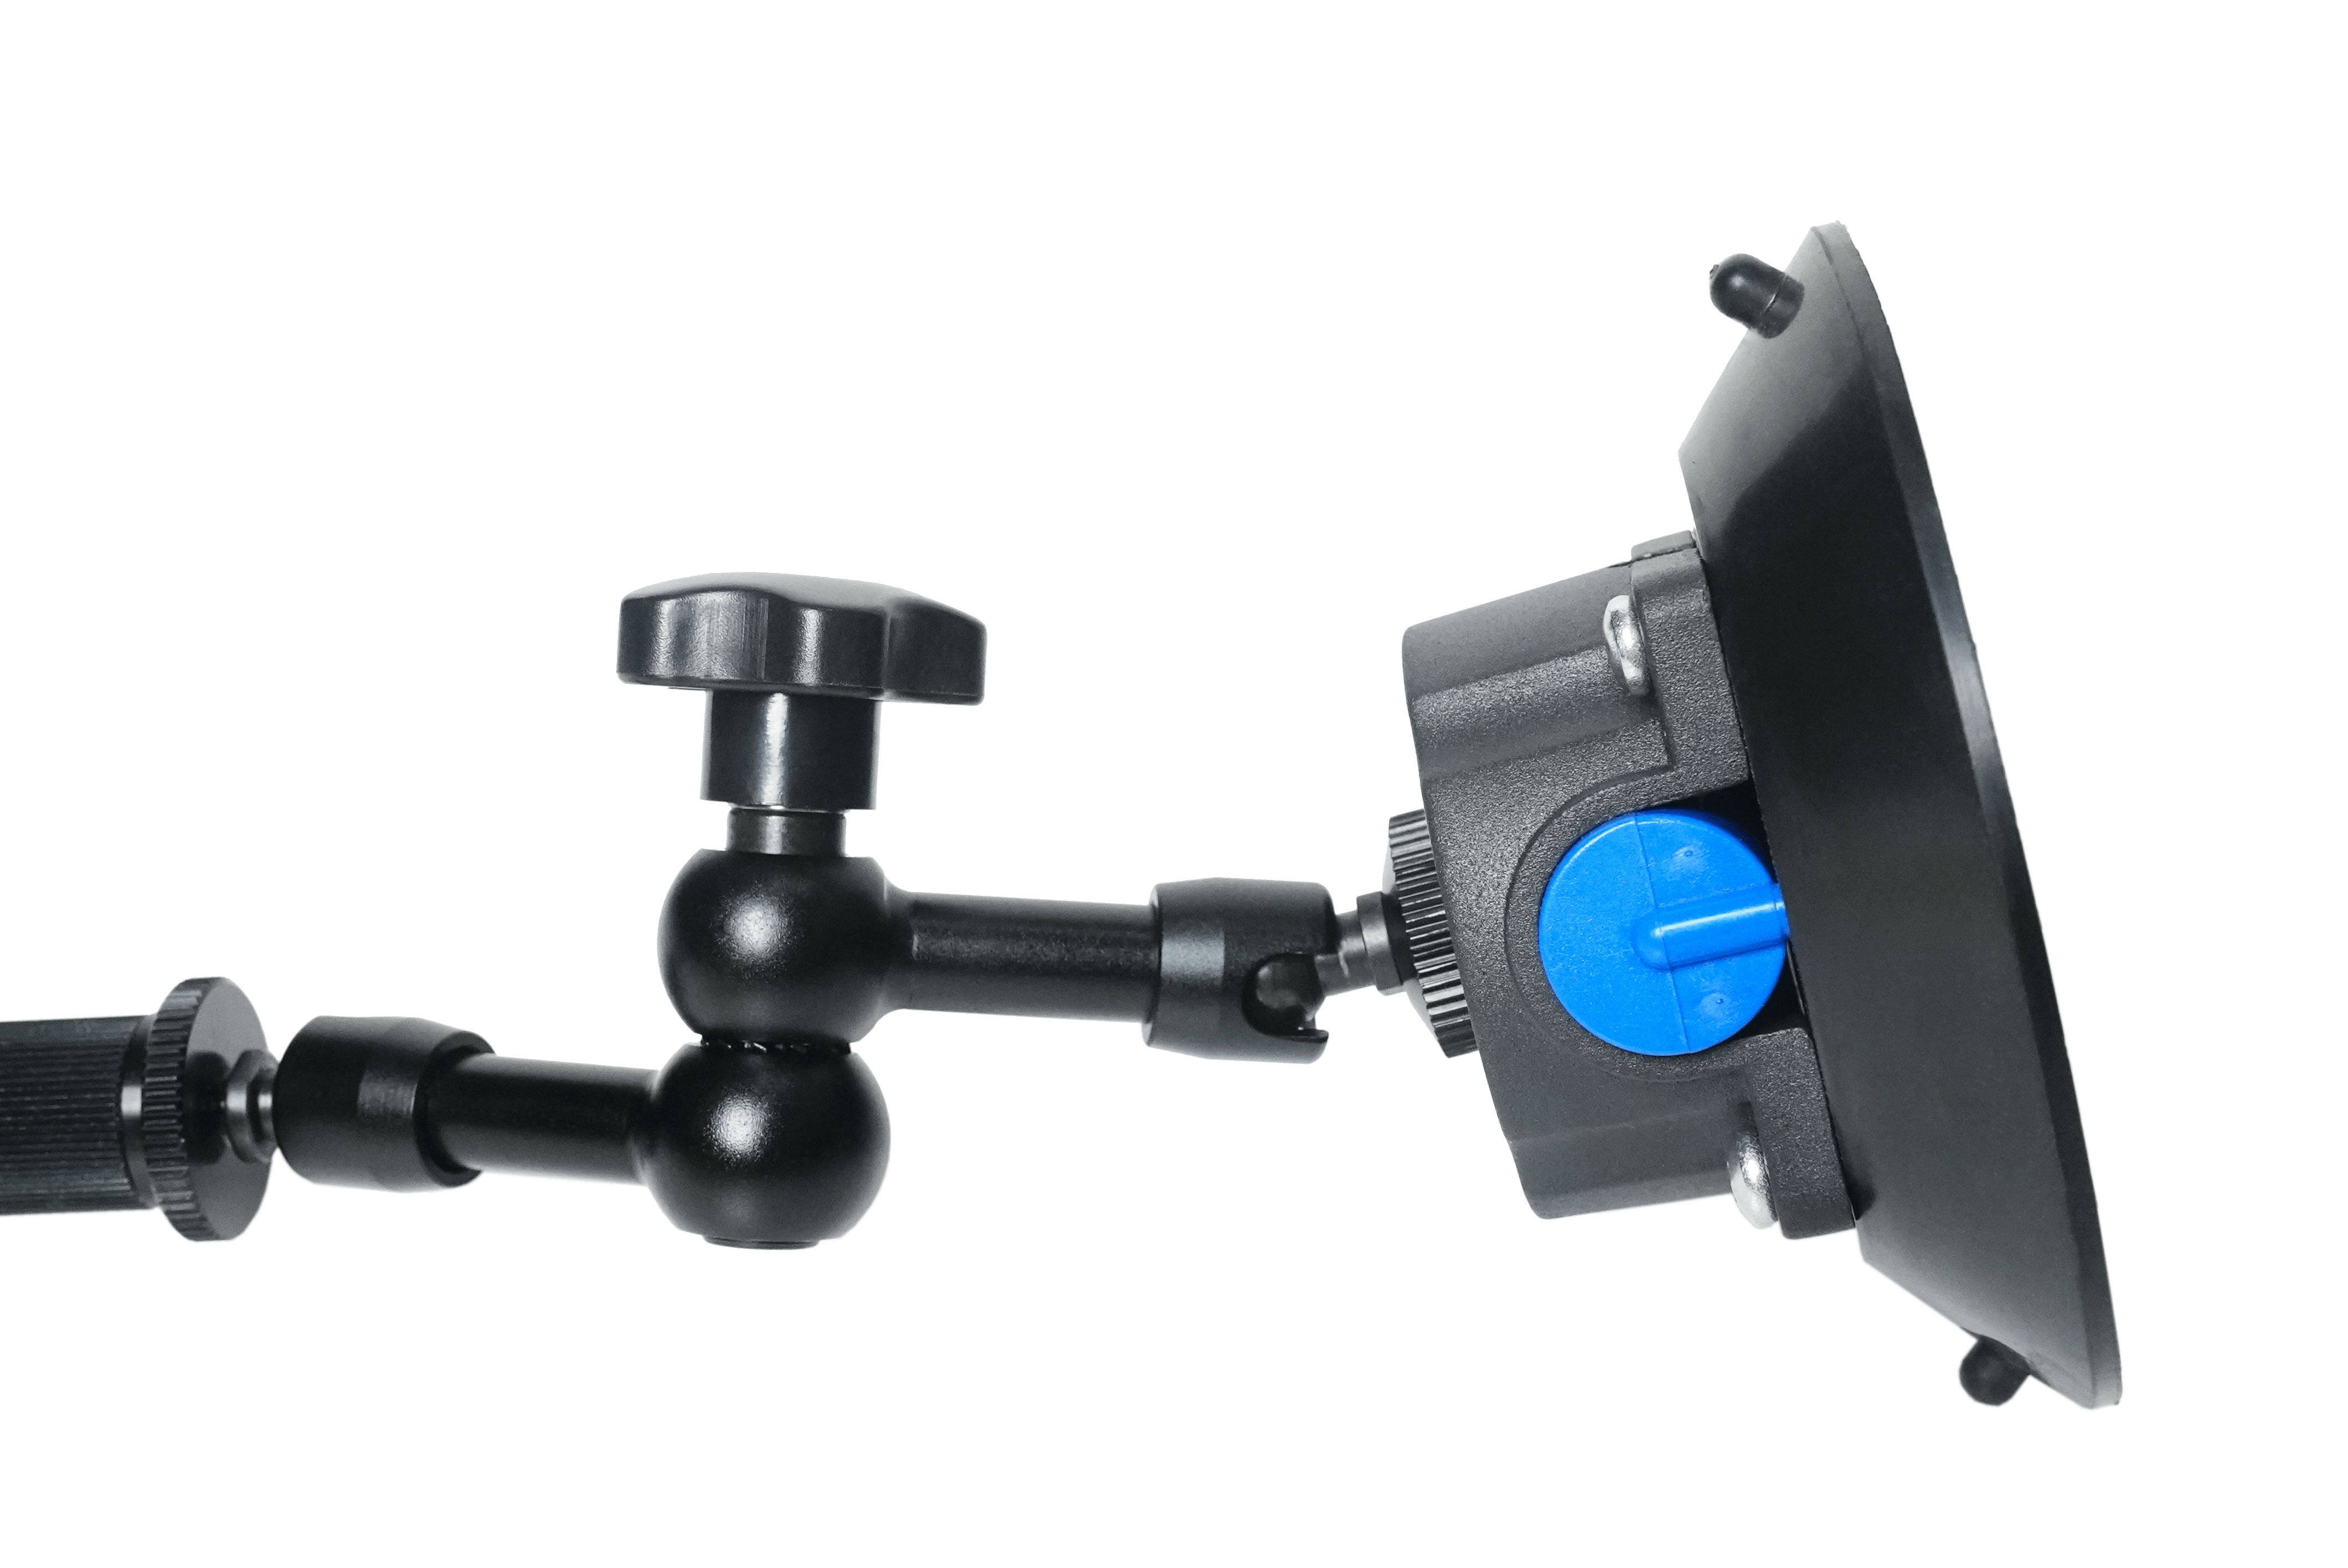 3 Articulating Arm Suction Cup Vehicle Mount for DSLR & Mirrorless